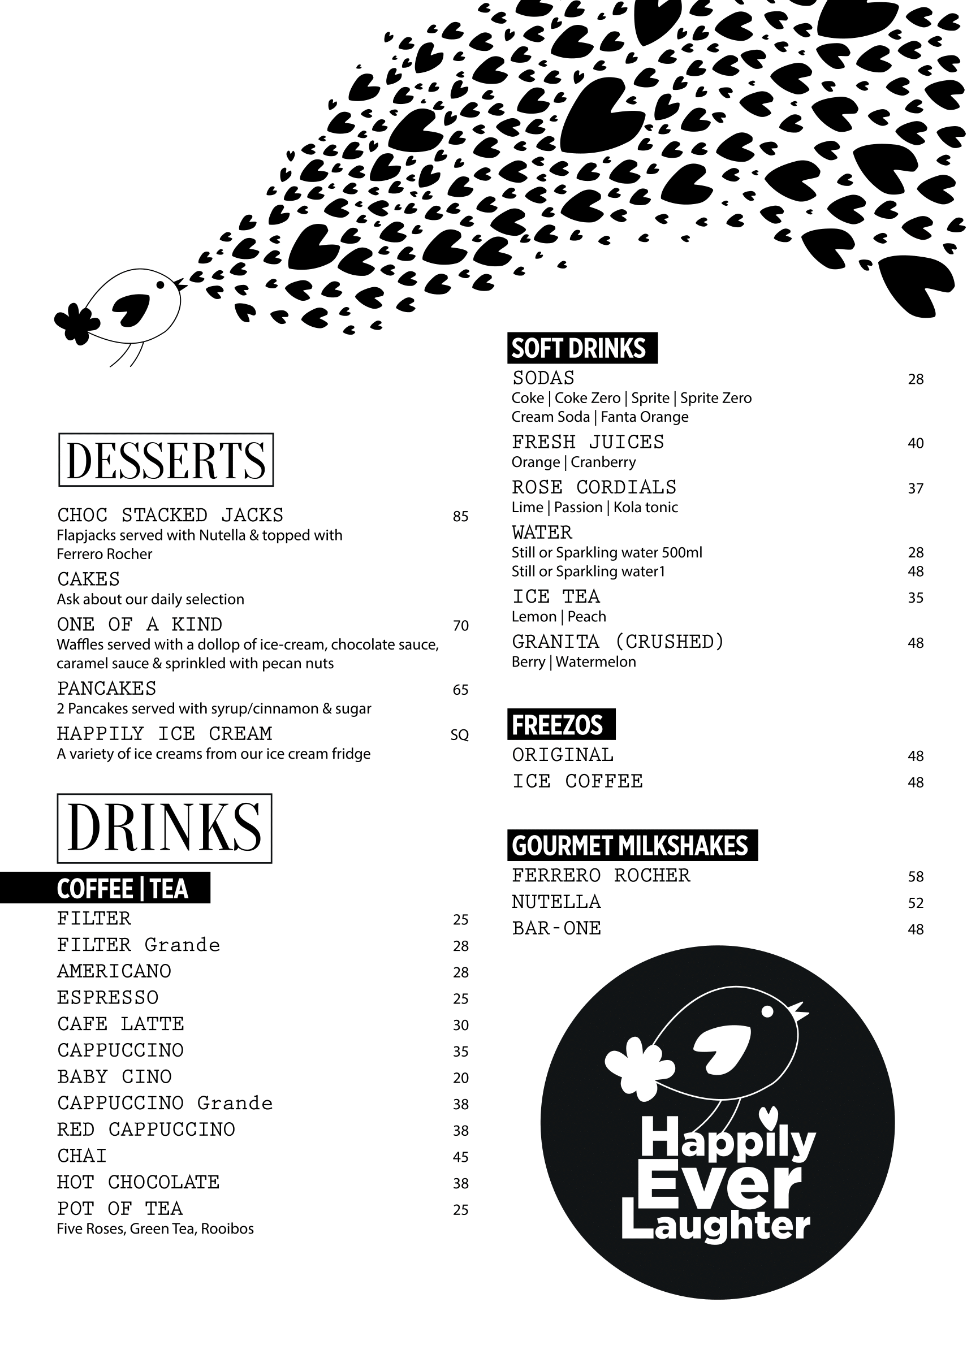 Happily Ever Laughter_Restaurant_Menu_Desserts and Drinks